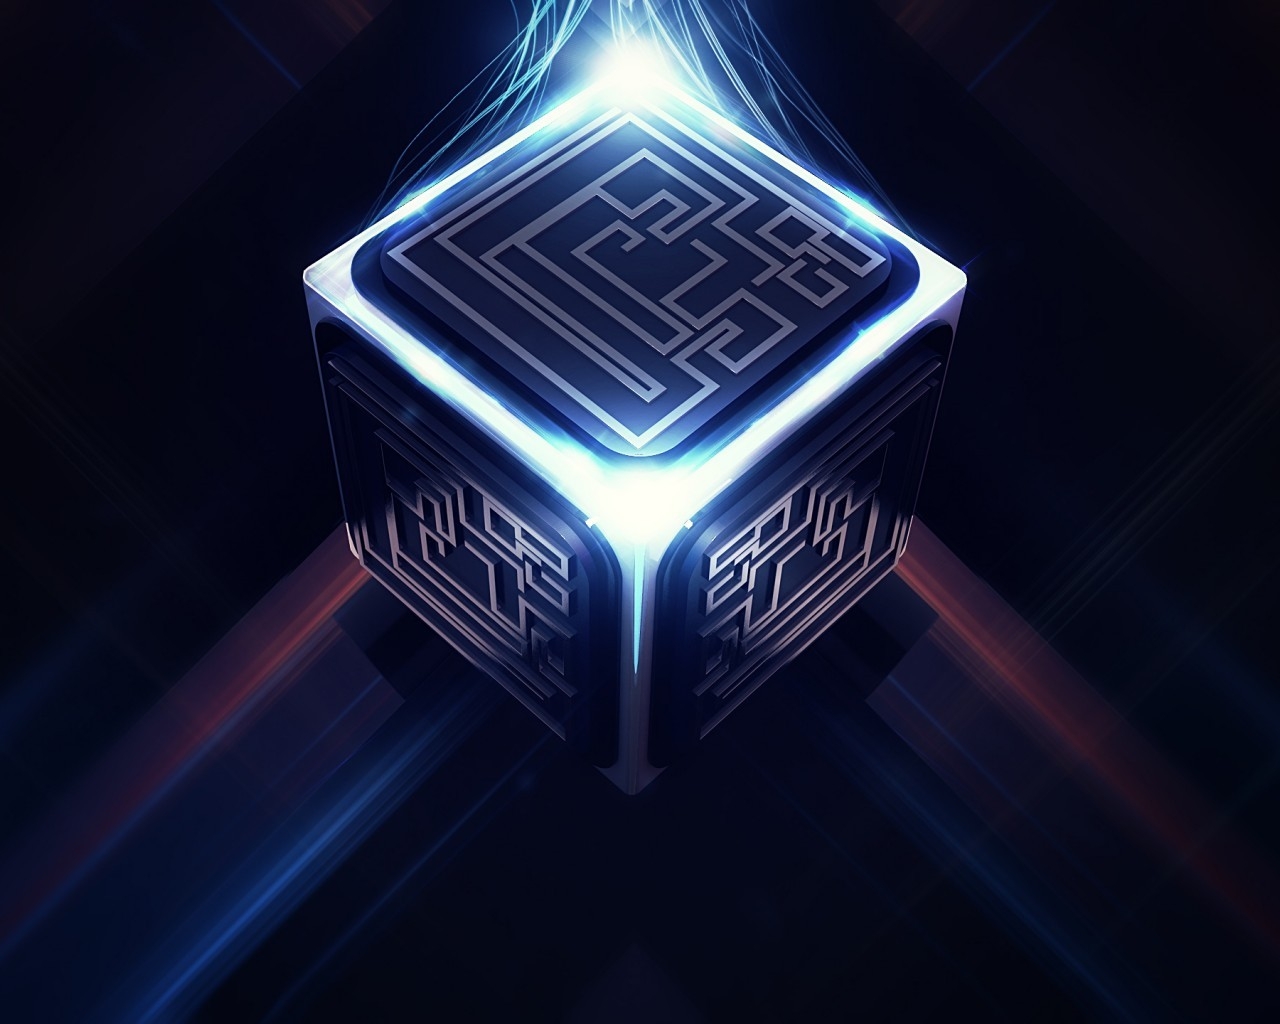 3D Cube Maze for 1280 x 1024 resolution